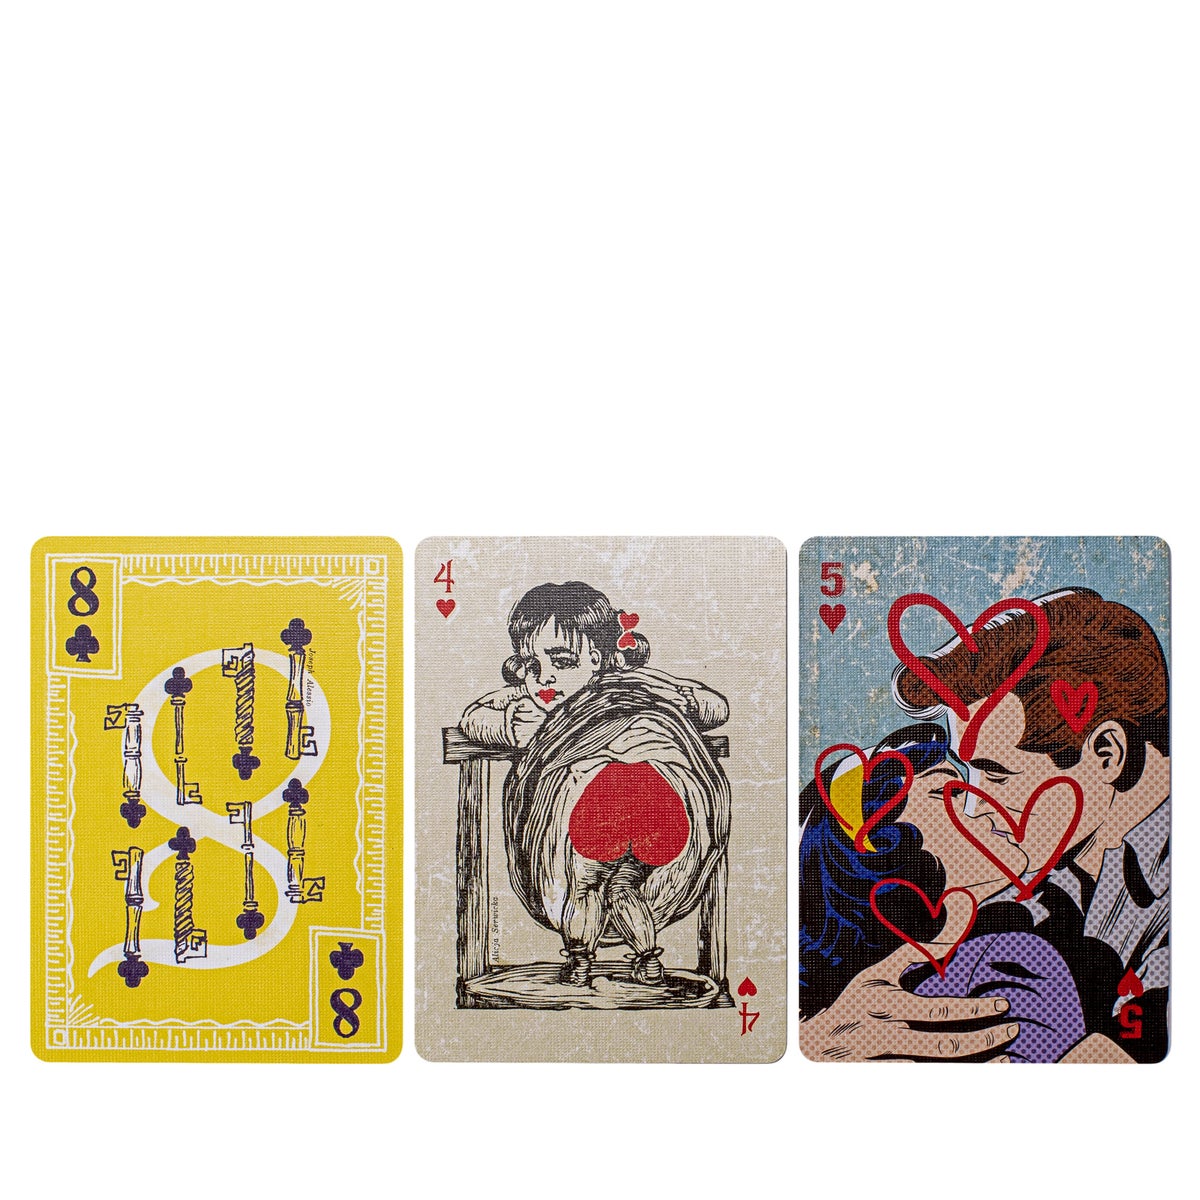 ART OF PLAY - PLAYING CARDS - ULTIMATE DECK